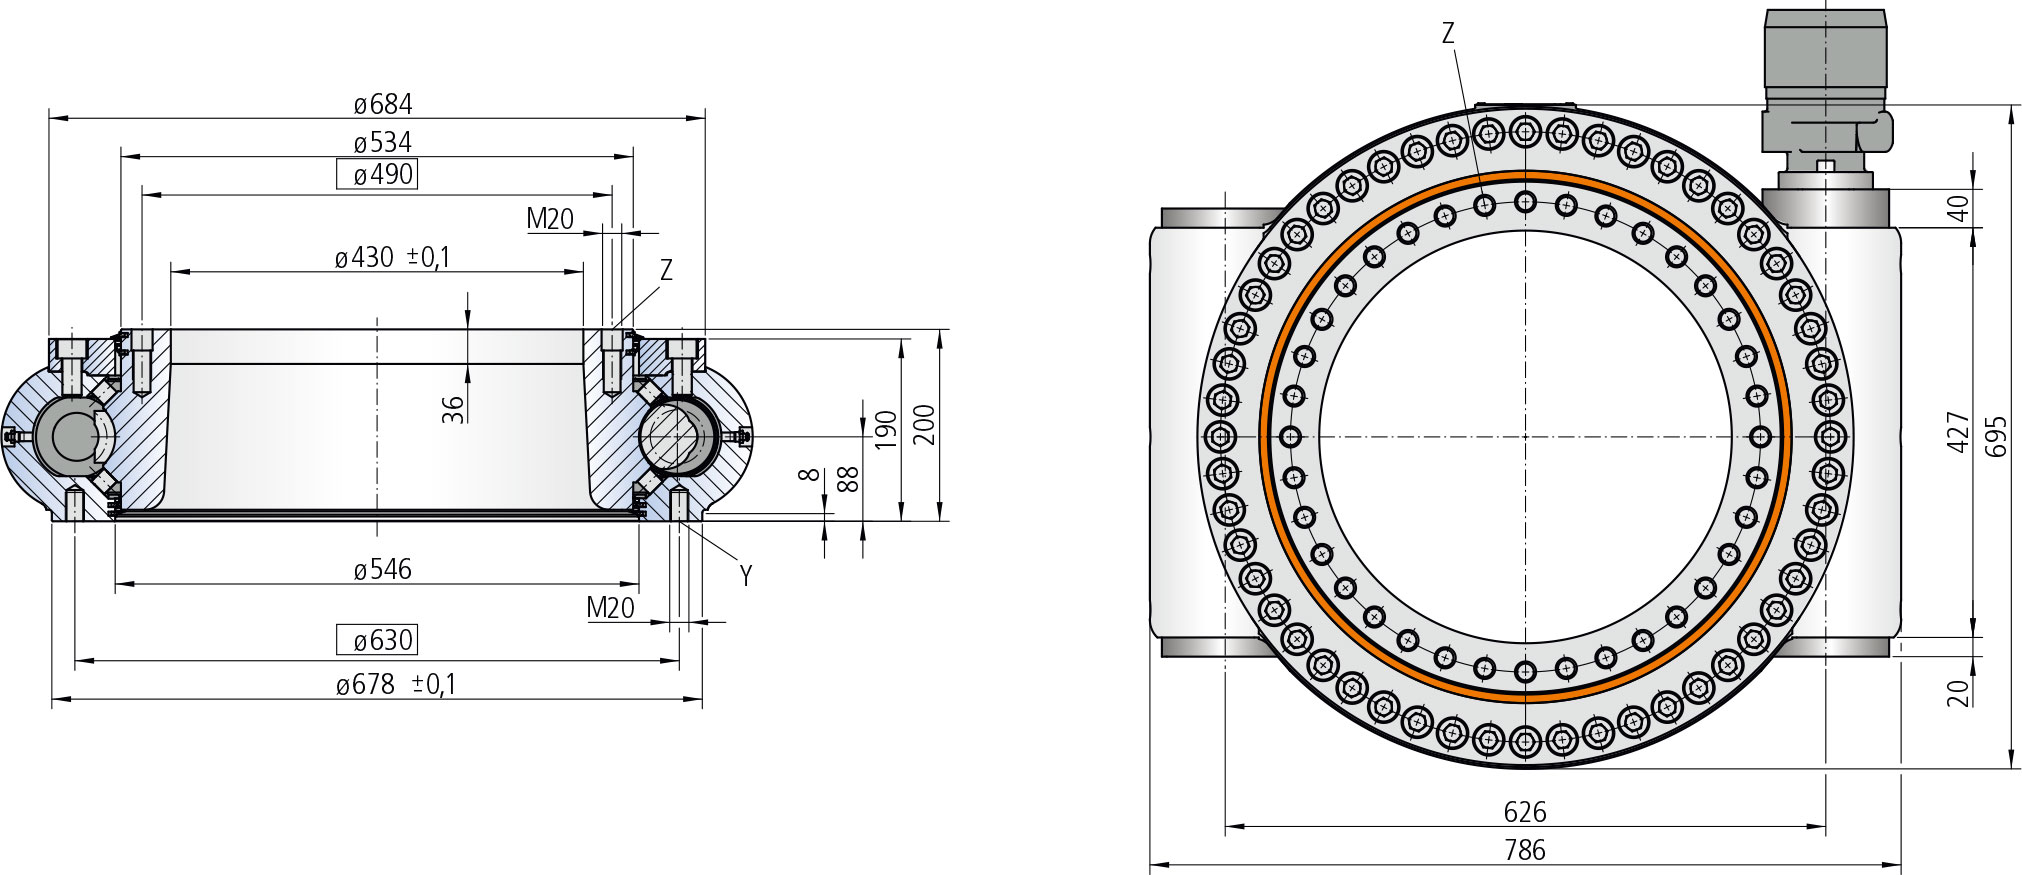 WD-H 0490 / 1 drive WD-H Series cad drawing